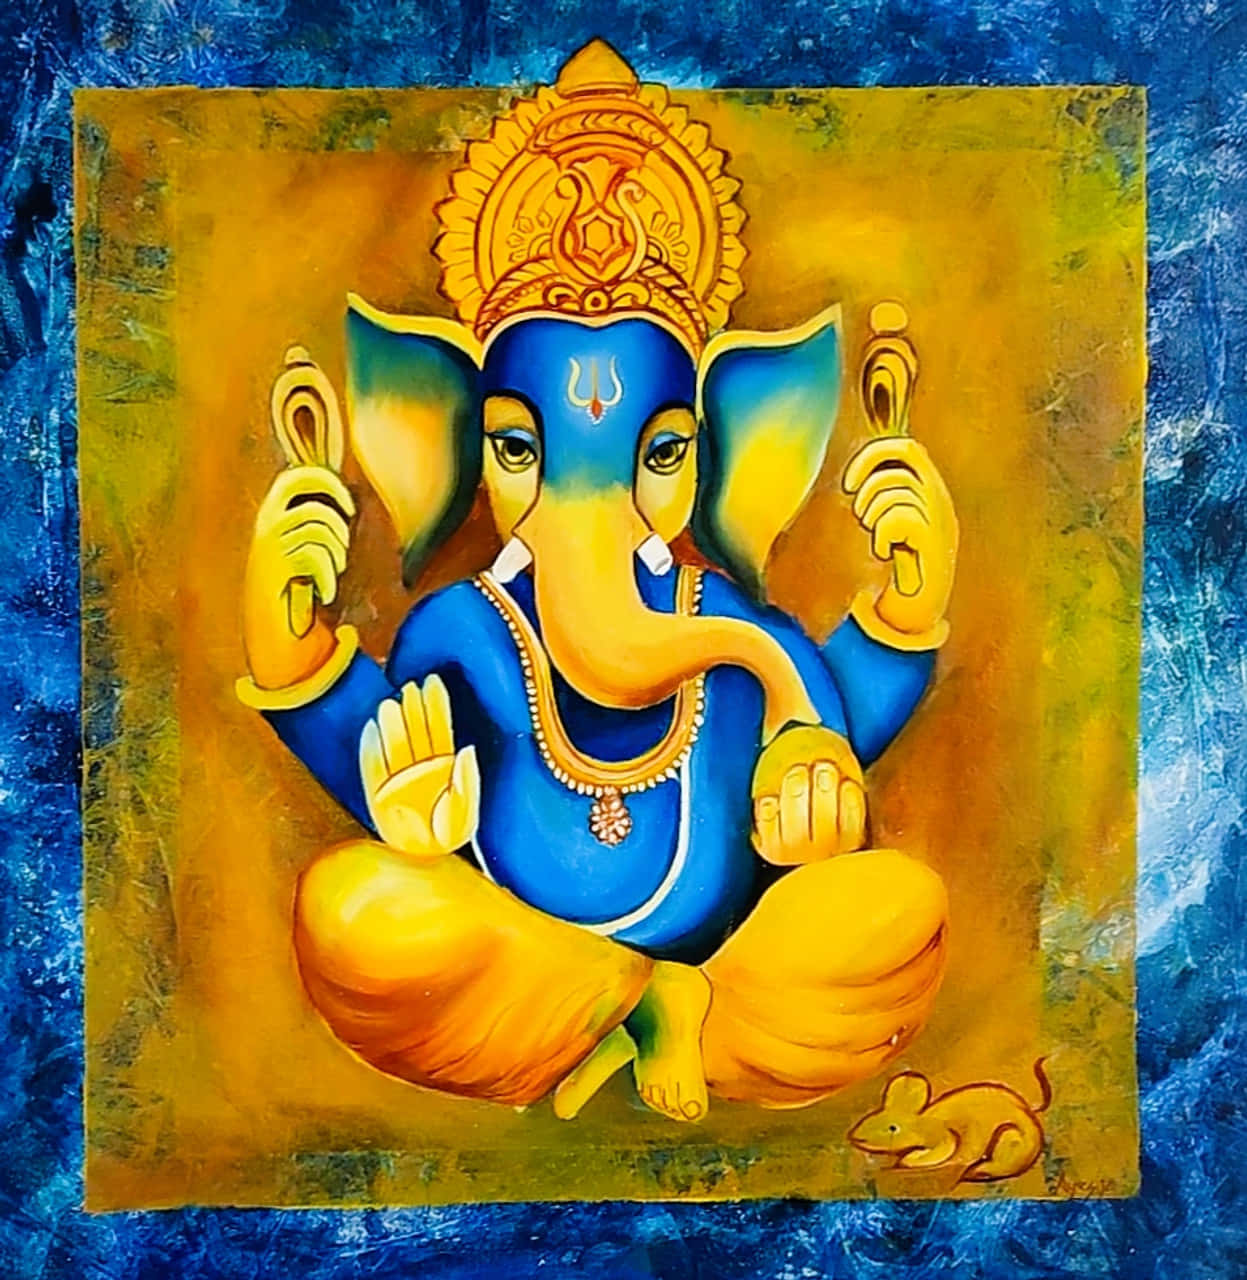 Download Celebrating Ganesha with little ones | Wallpapers.com